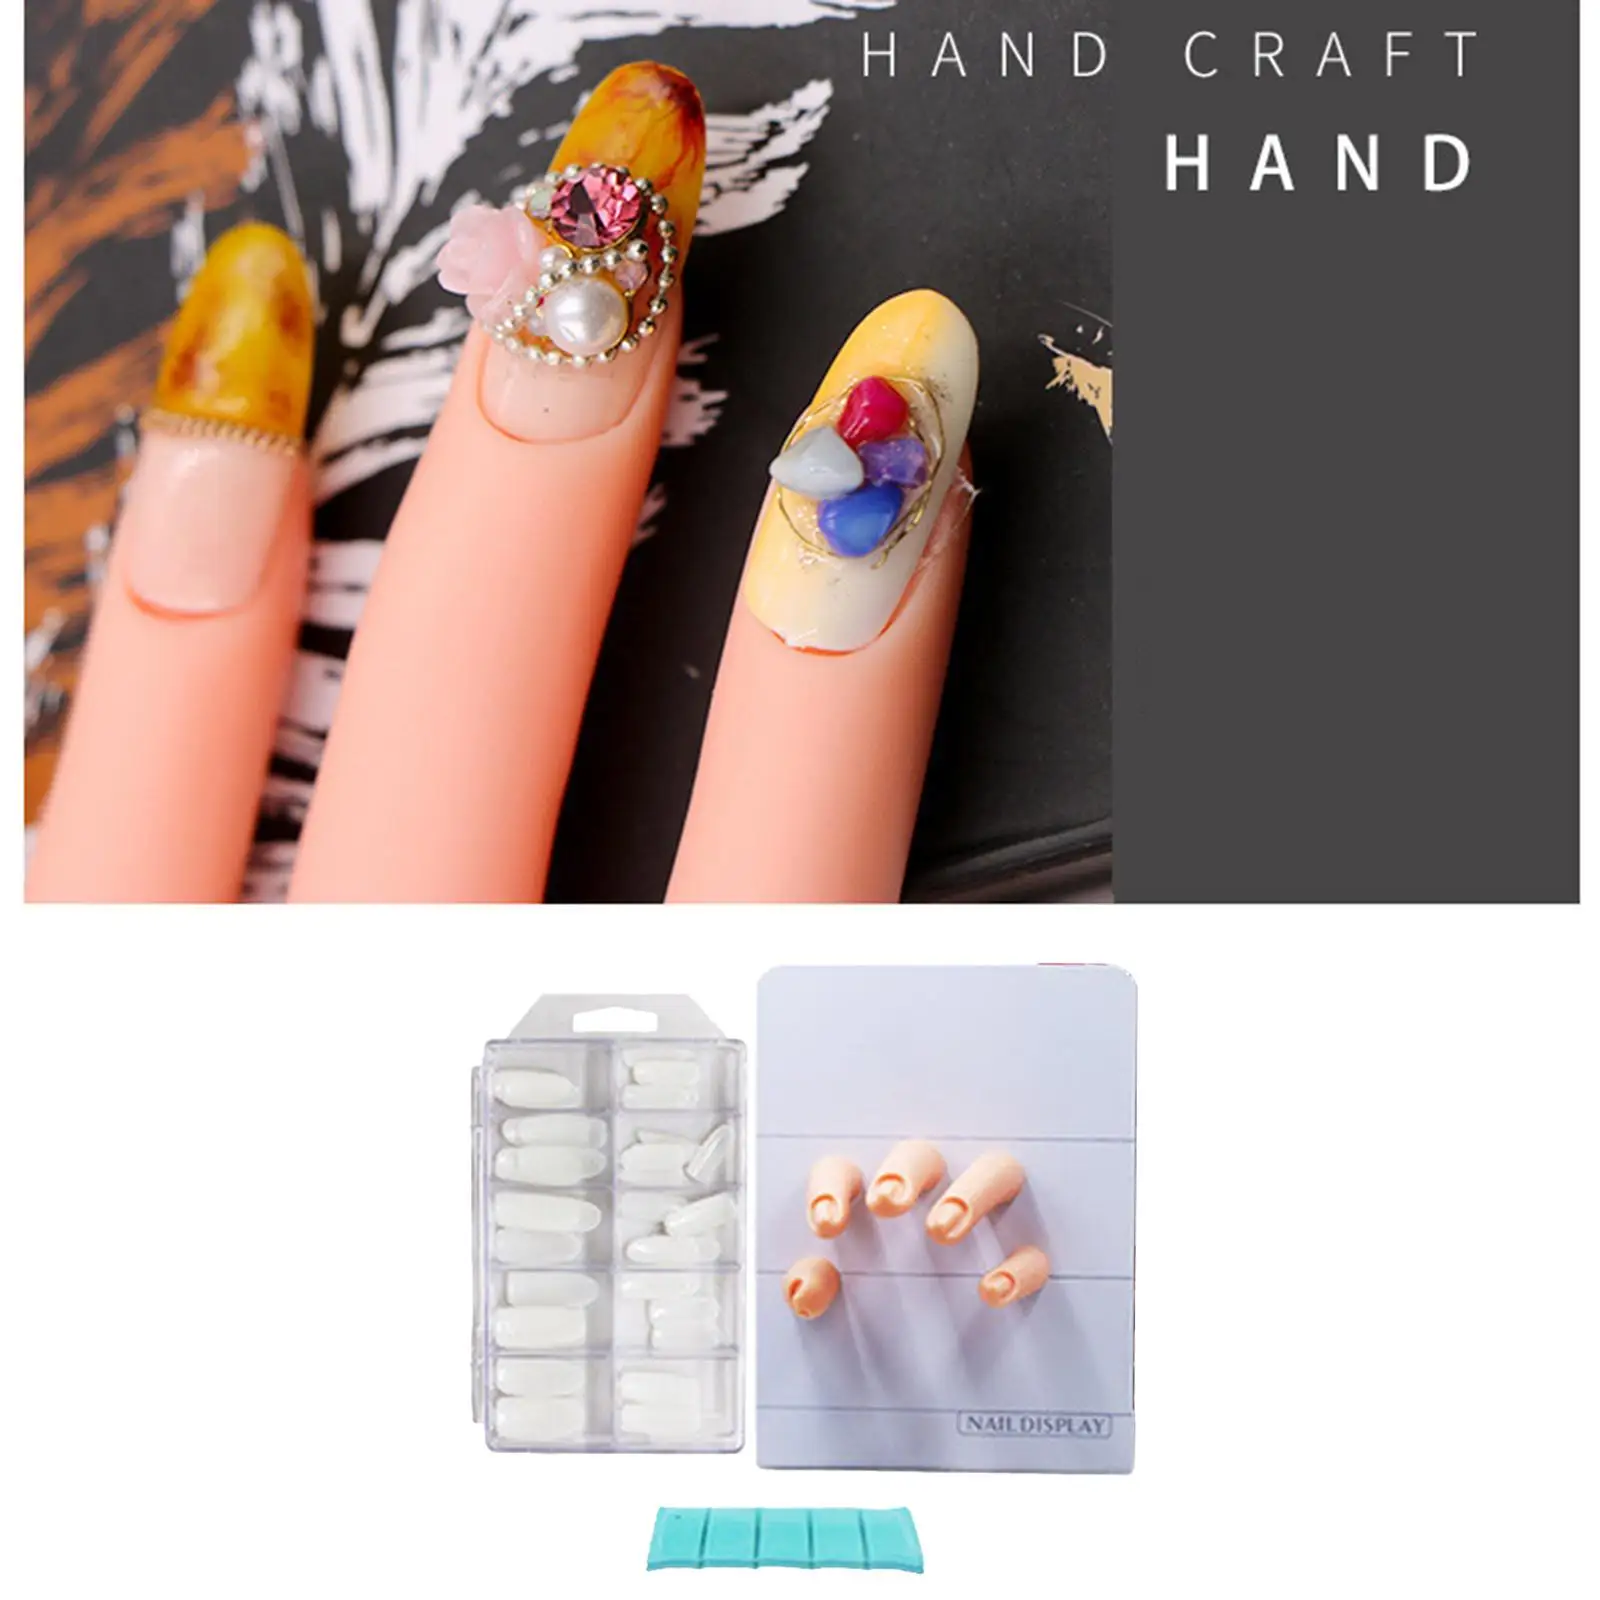 Training Tool Design Silicone Hand Manicure Supply Finger Decoration Practice Practice Hand